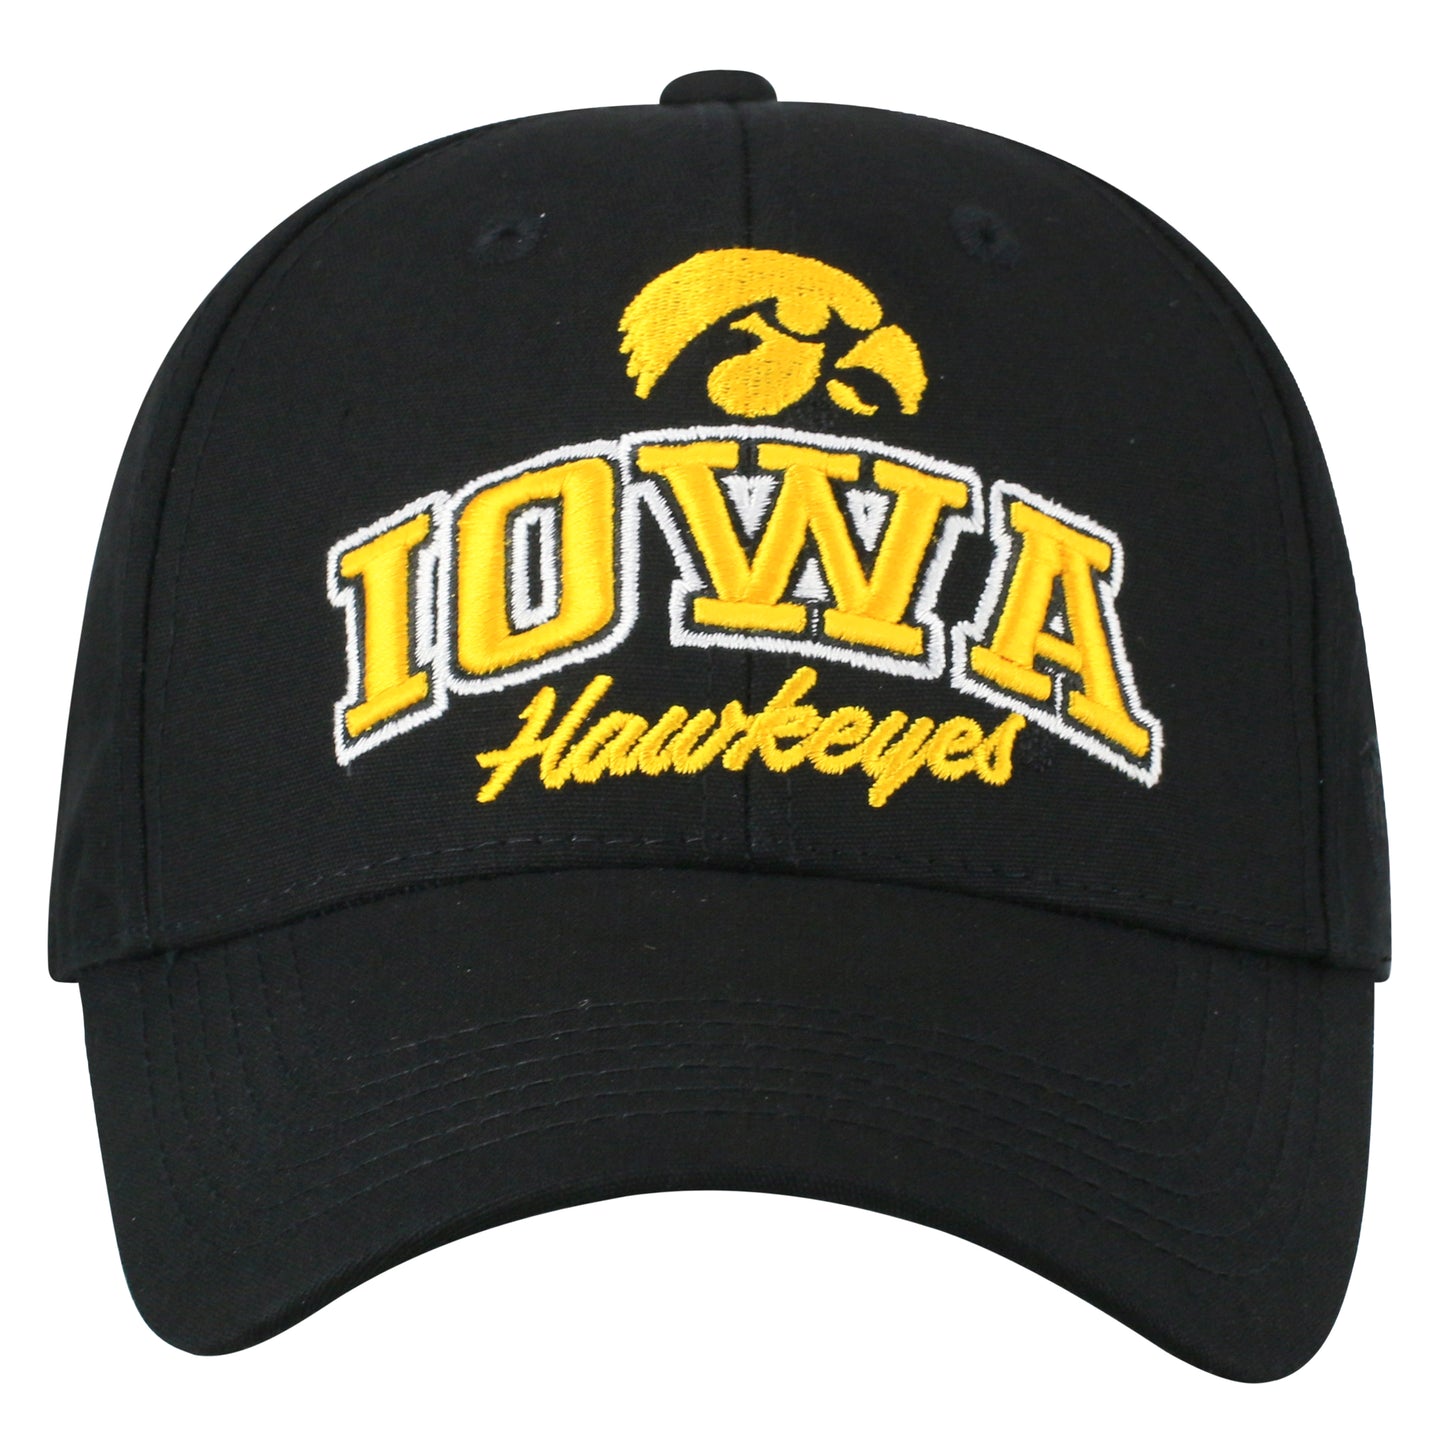 Mens Iowa Hawkeyes Advisor Adjustable Hat By Top Of The World